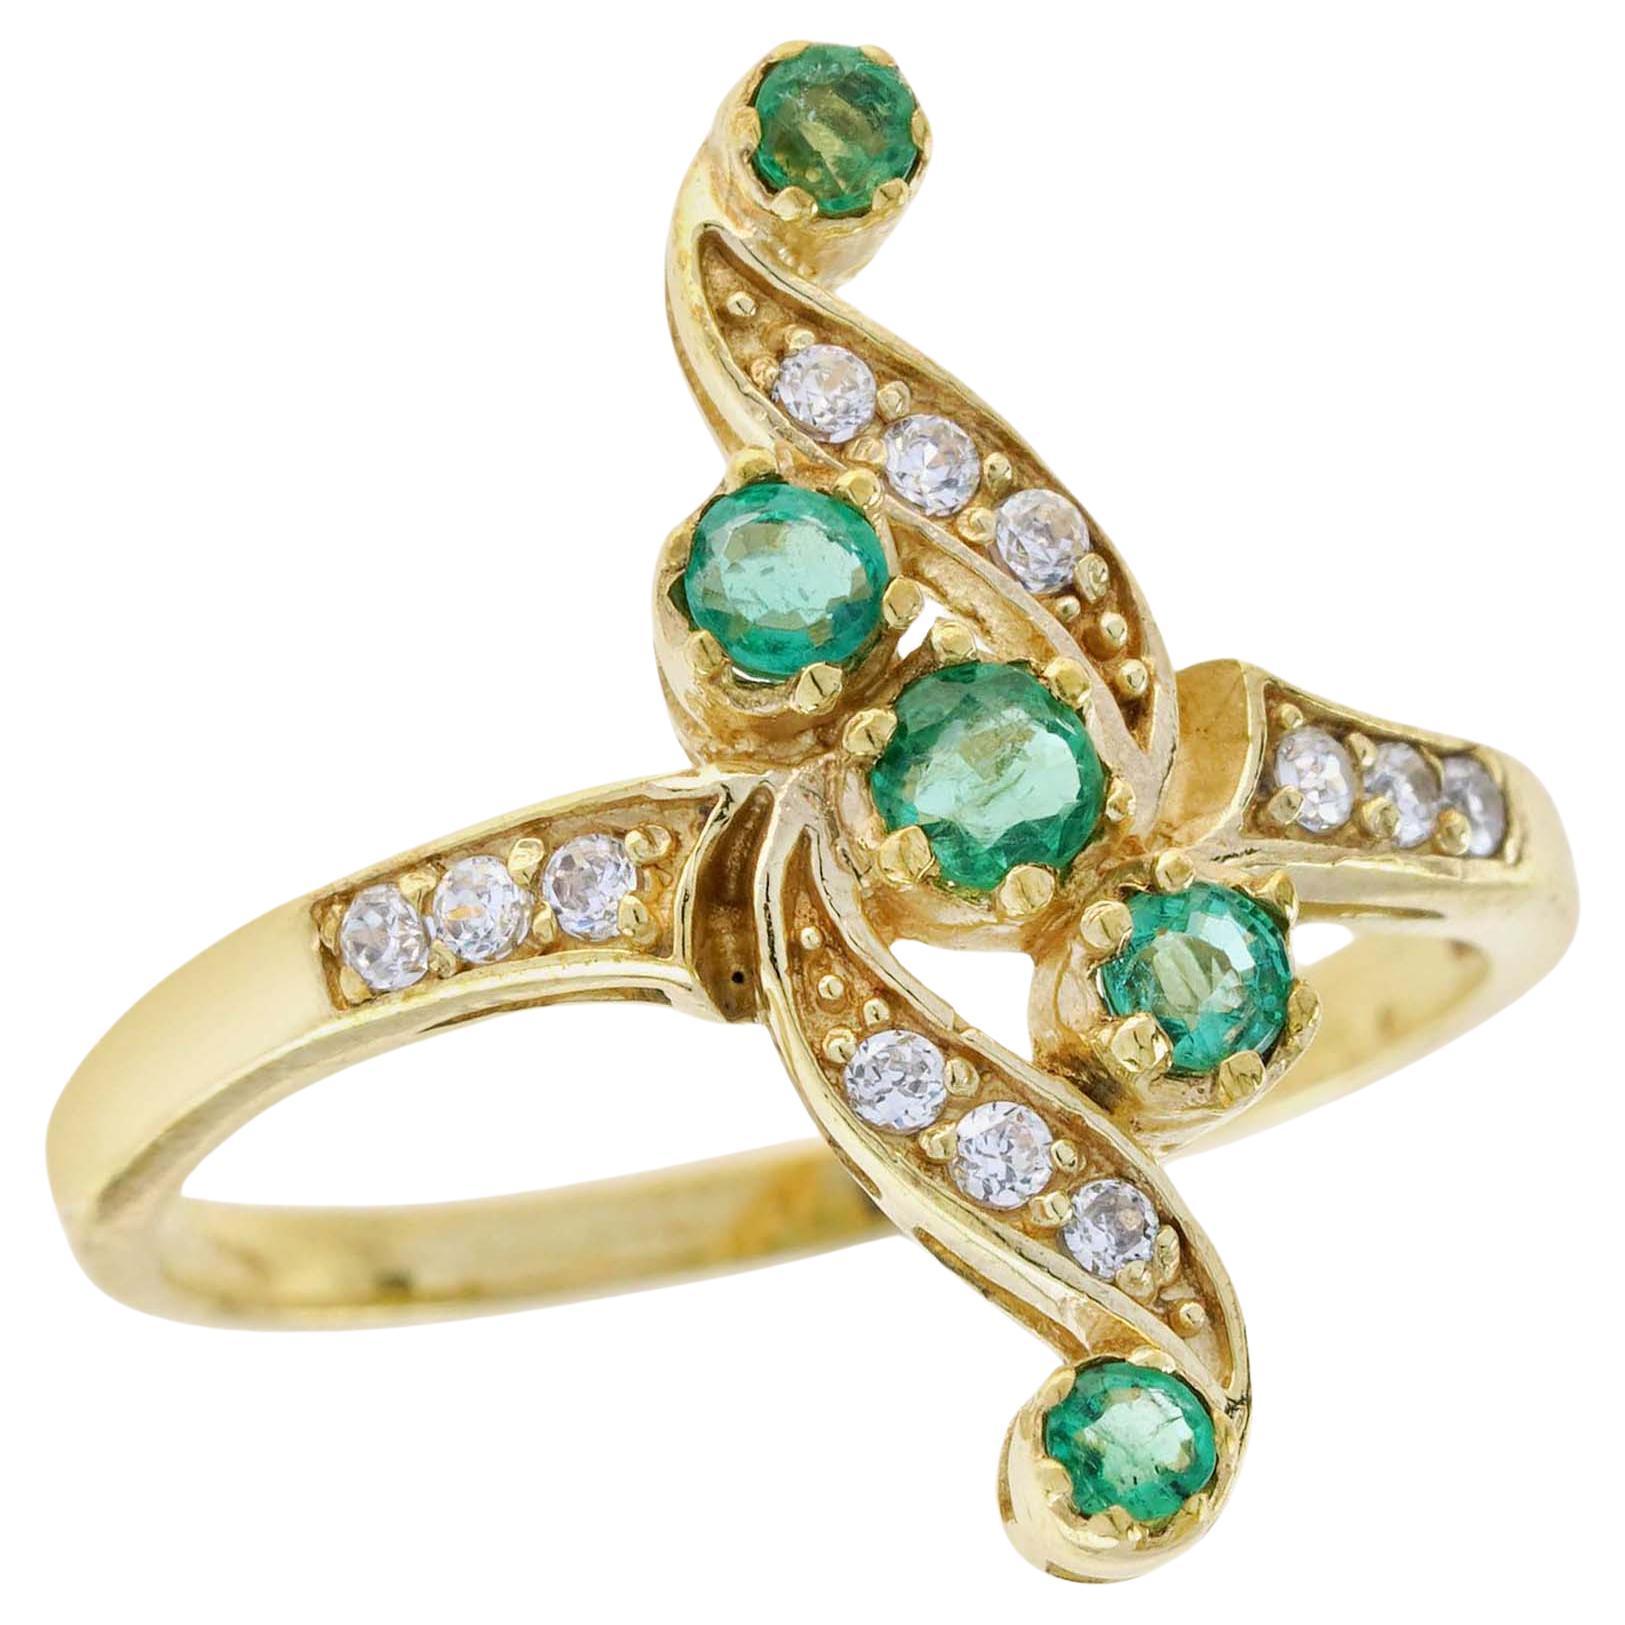 For Sale:  Natural Emerald and Diamond Vintage Style Vertical Ring in Solid 9K Yellow Gold